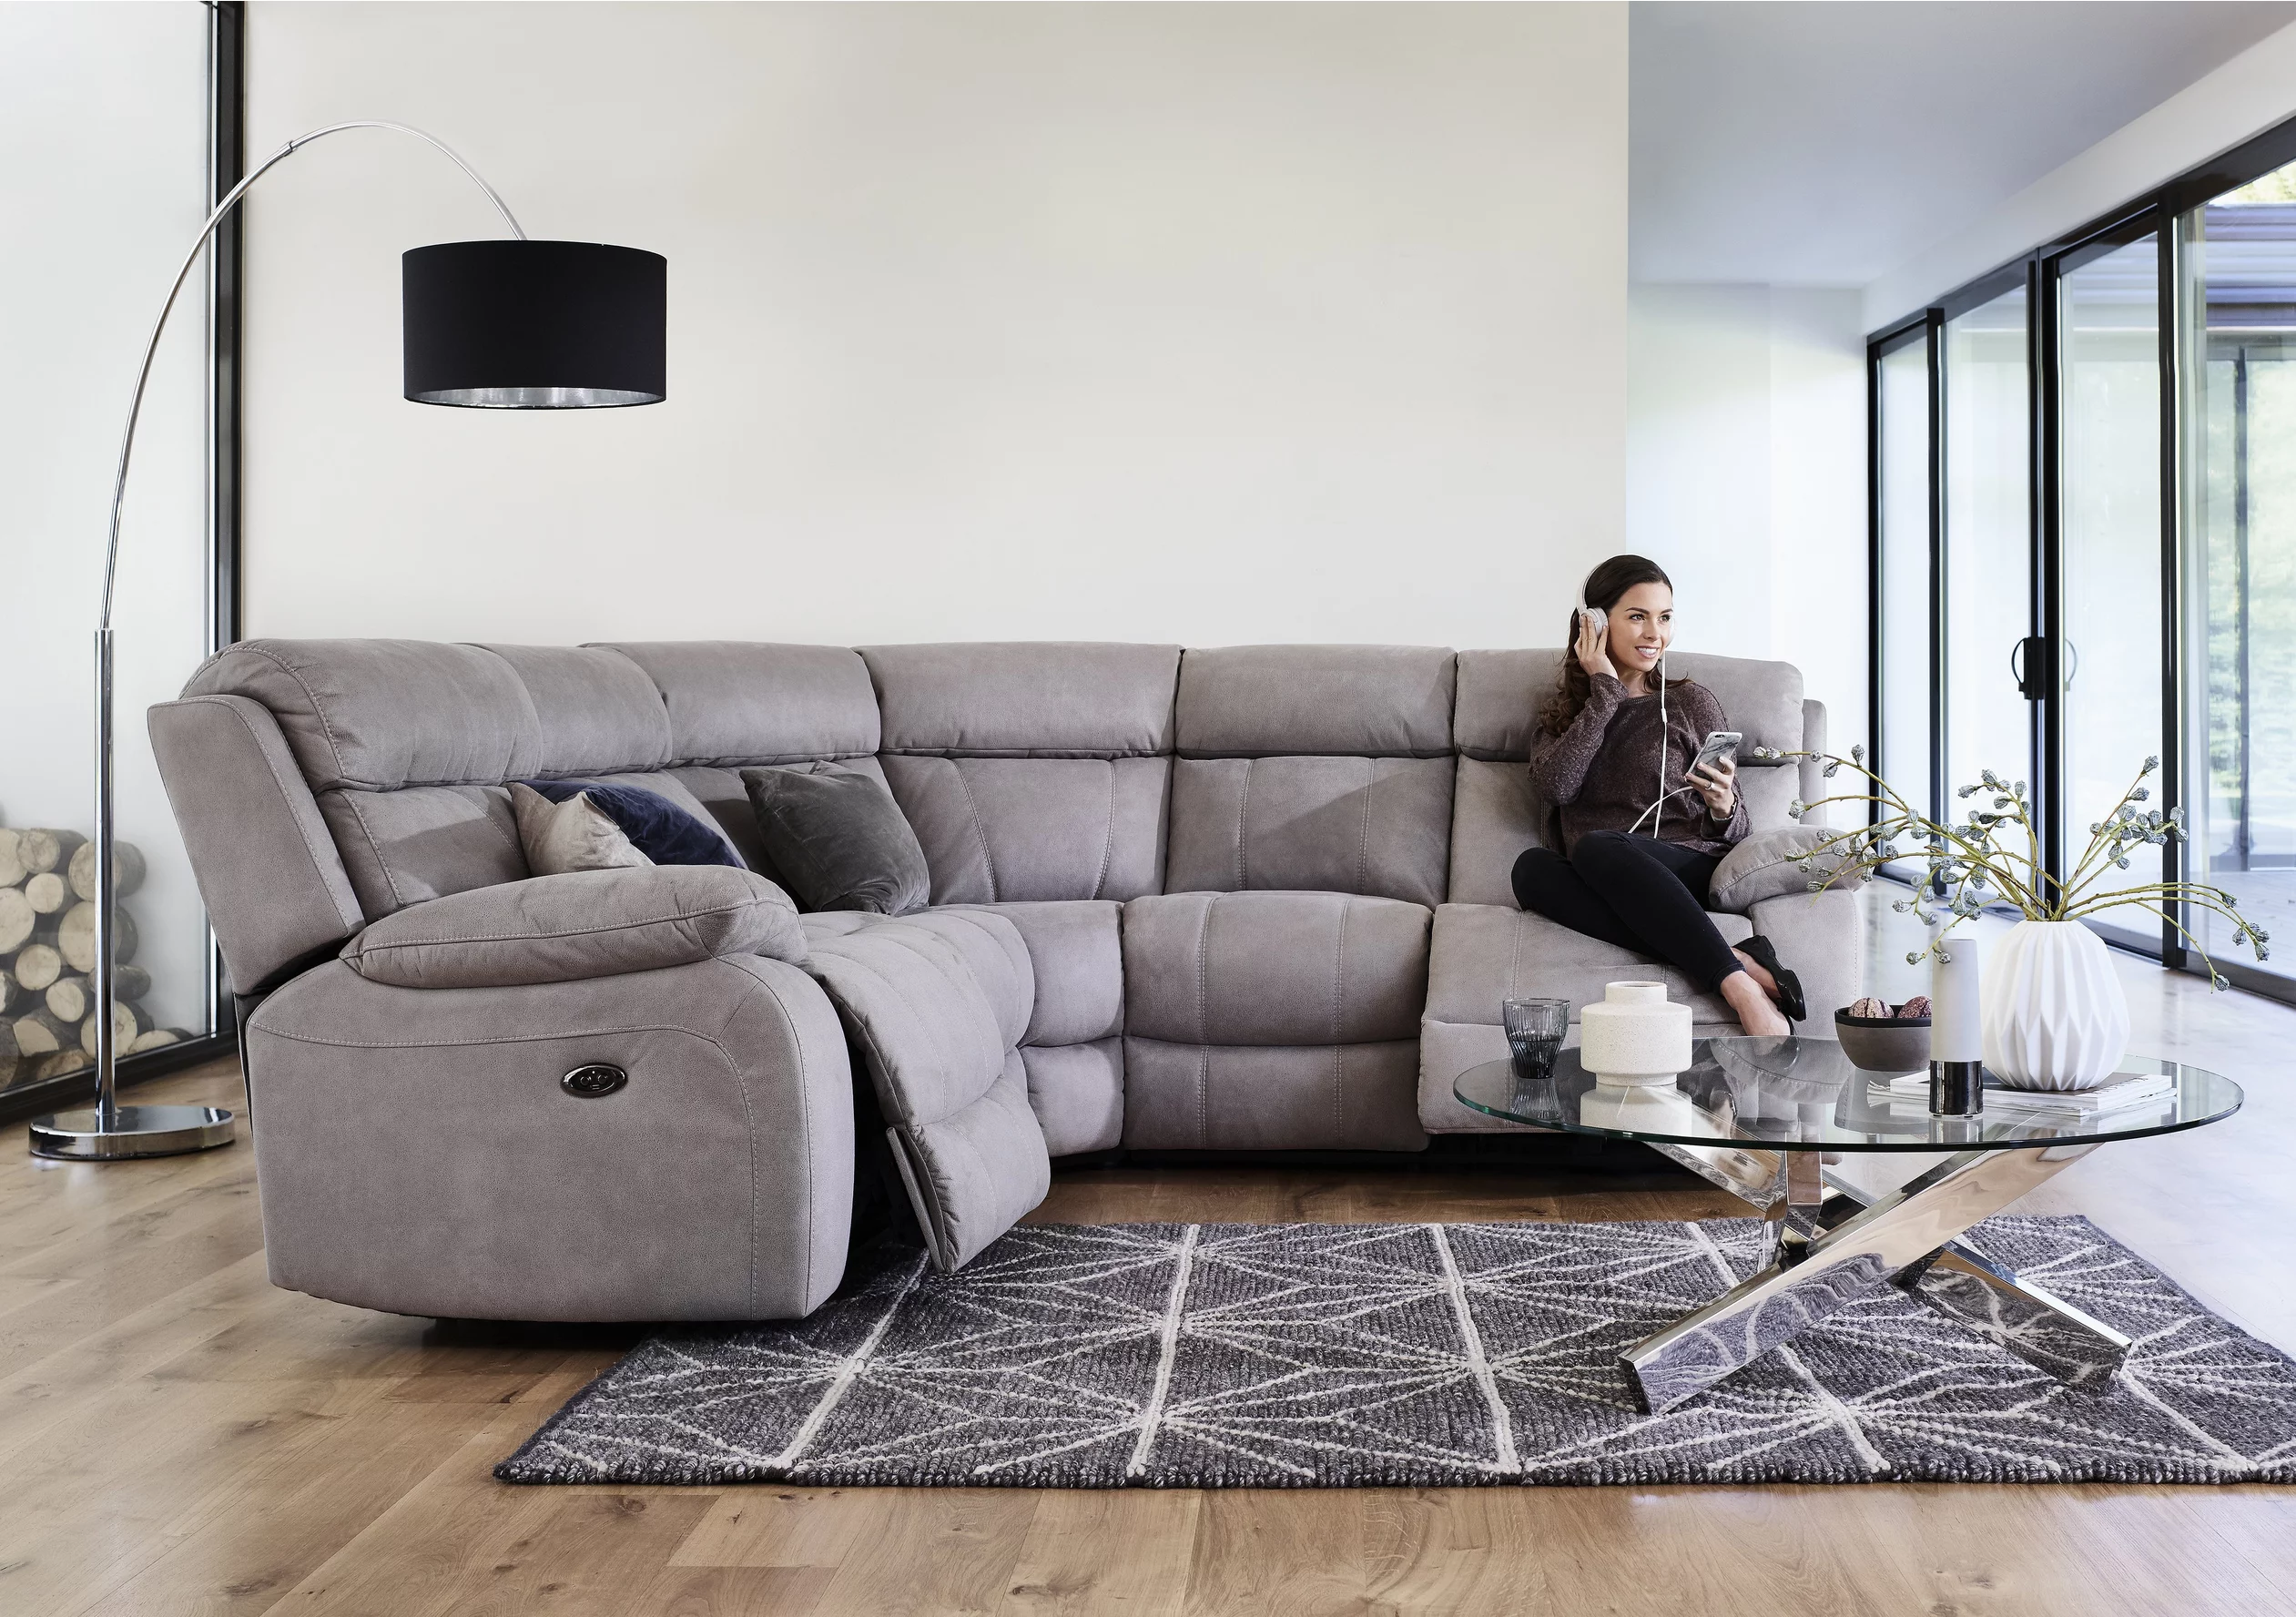 Top 10 Best Sofas to Buy in 2021